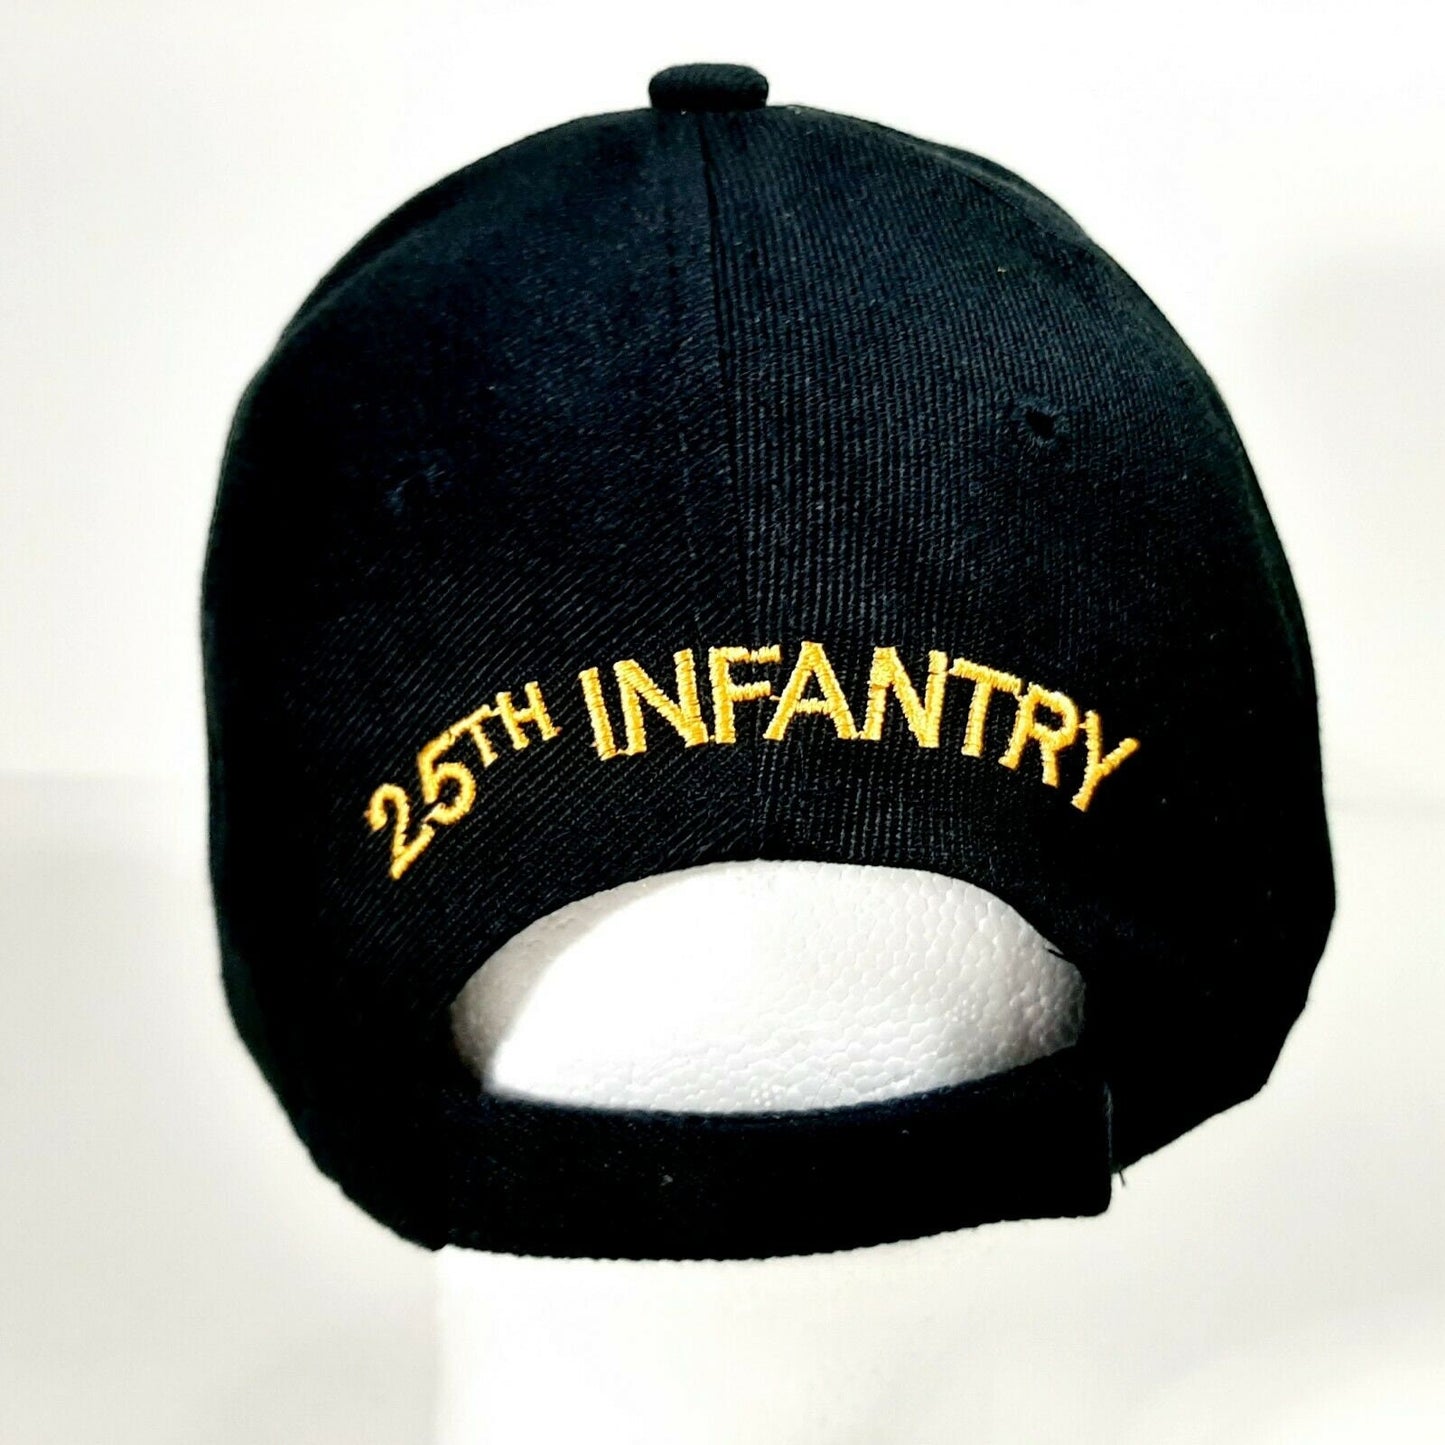 US Army 25th Infantry Division Tropic Lightning Men's Hat Cap Black Embroidered Acrylic